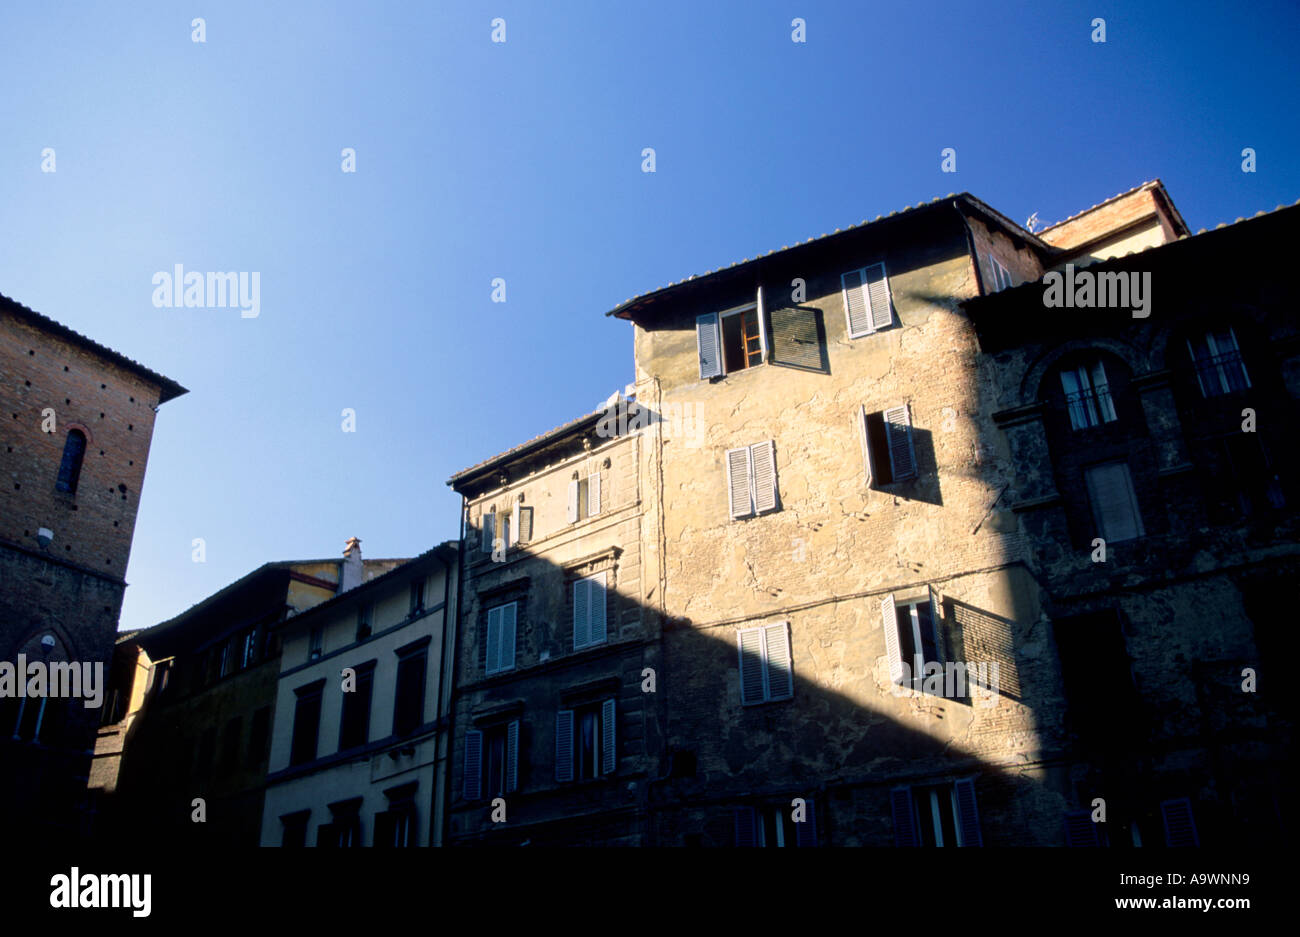 Tuscany, Siena, buildings with shuttered windows, low angle view Stock Photo